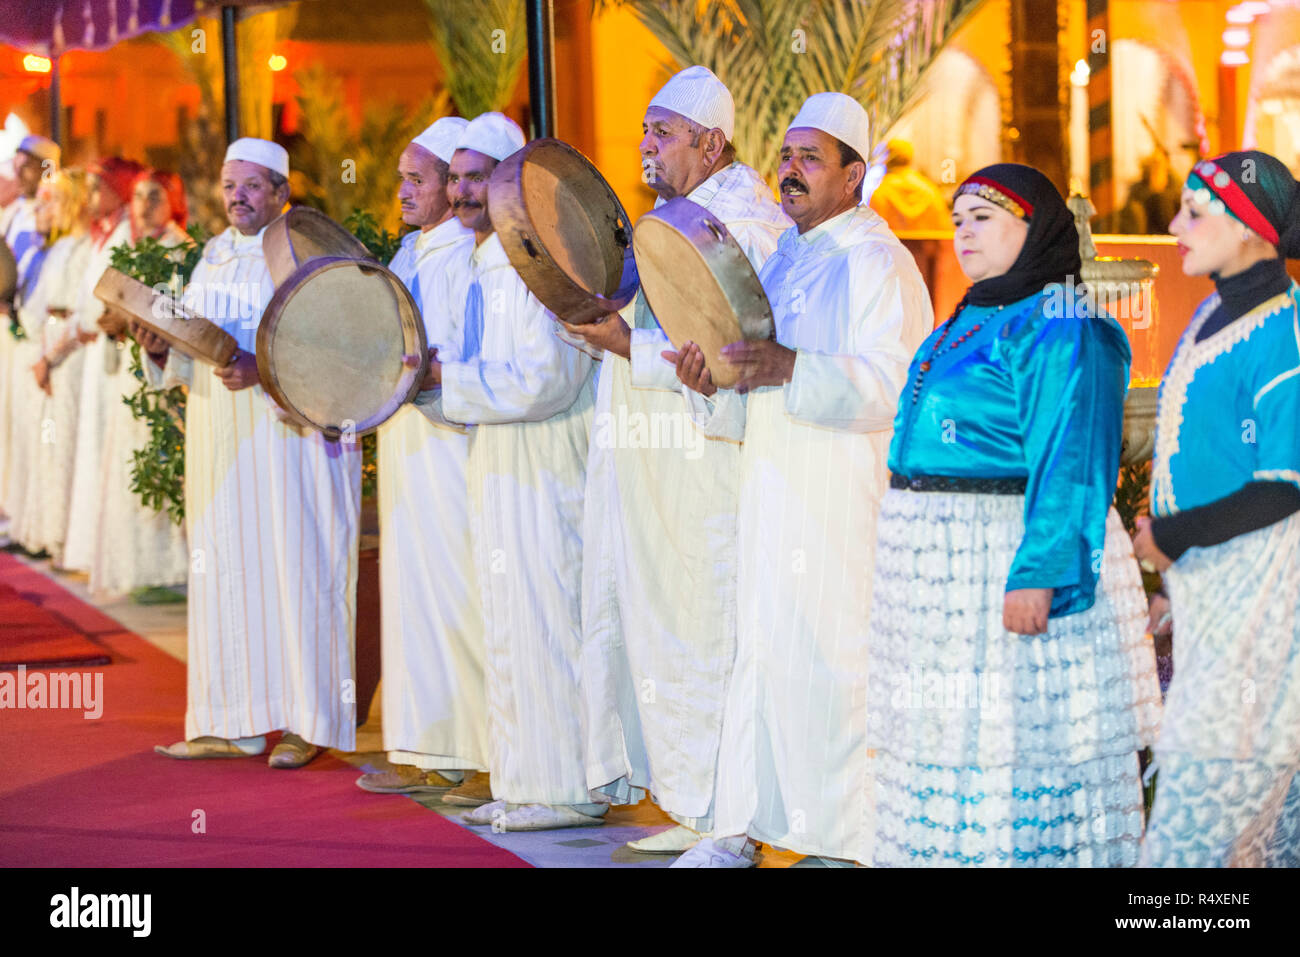 26-02-15, Marrakech, Morocco. Tourist entertainment at the Chez Ali Fantasia show. Guests are entertained by the songs and dances of folk groups, a be Stock Photo